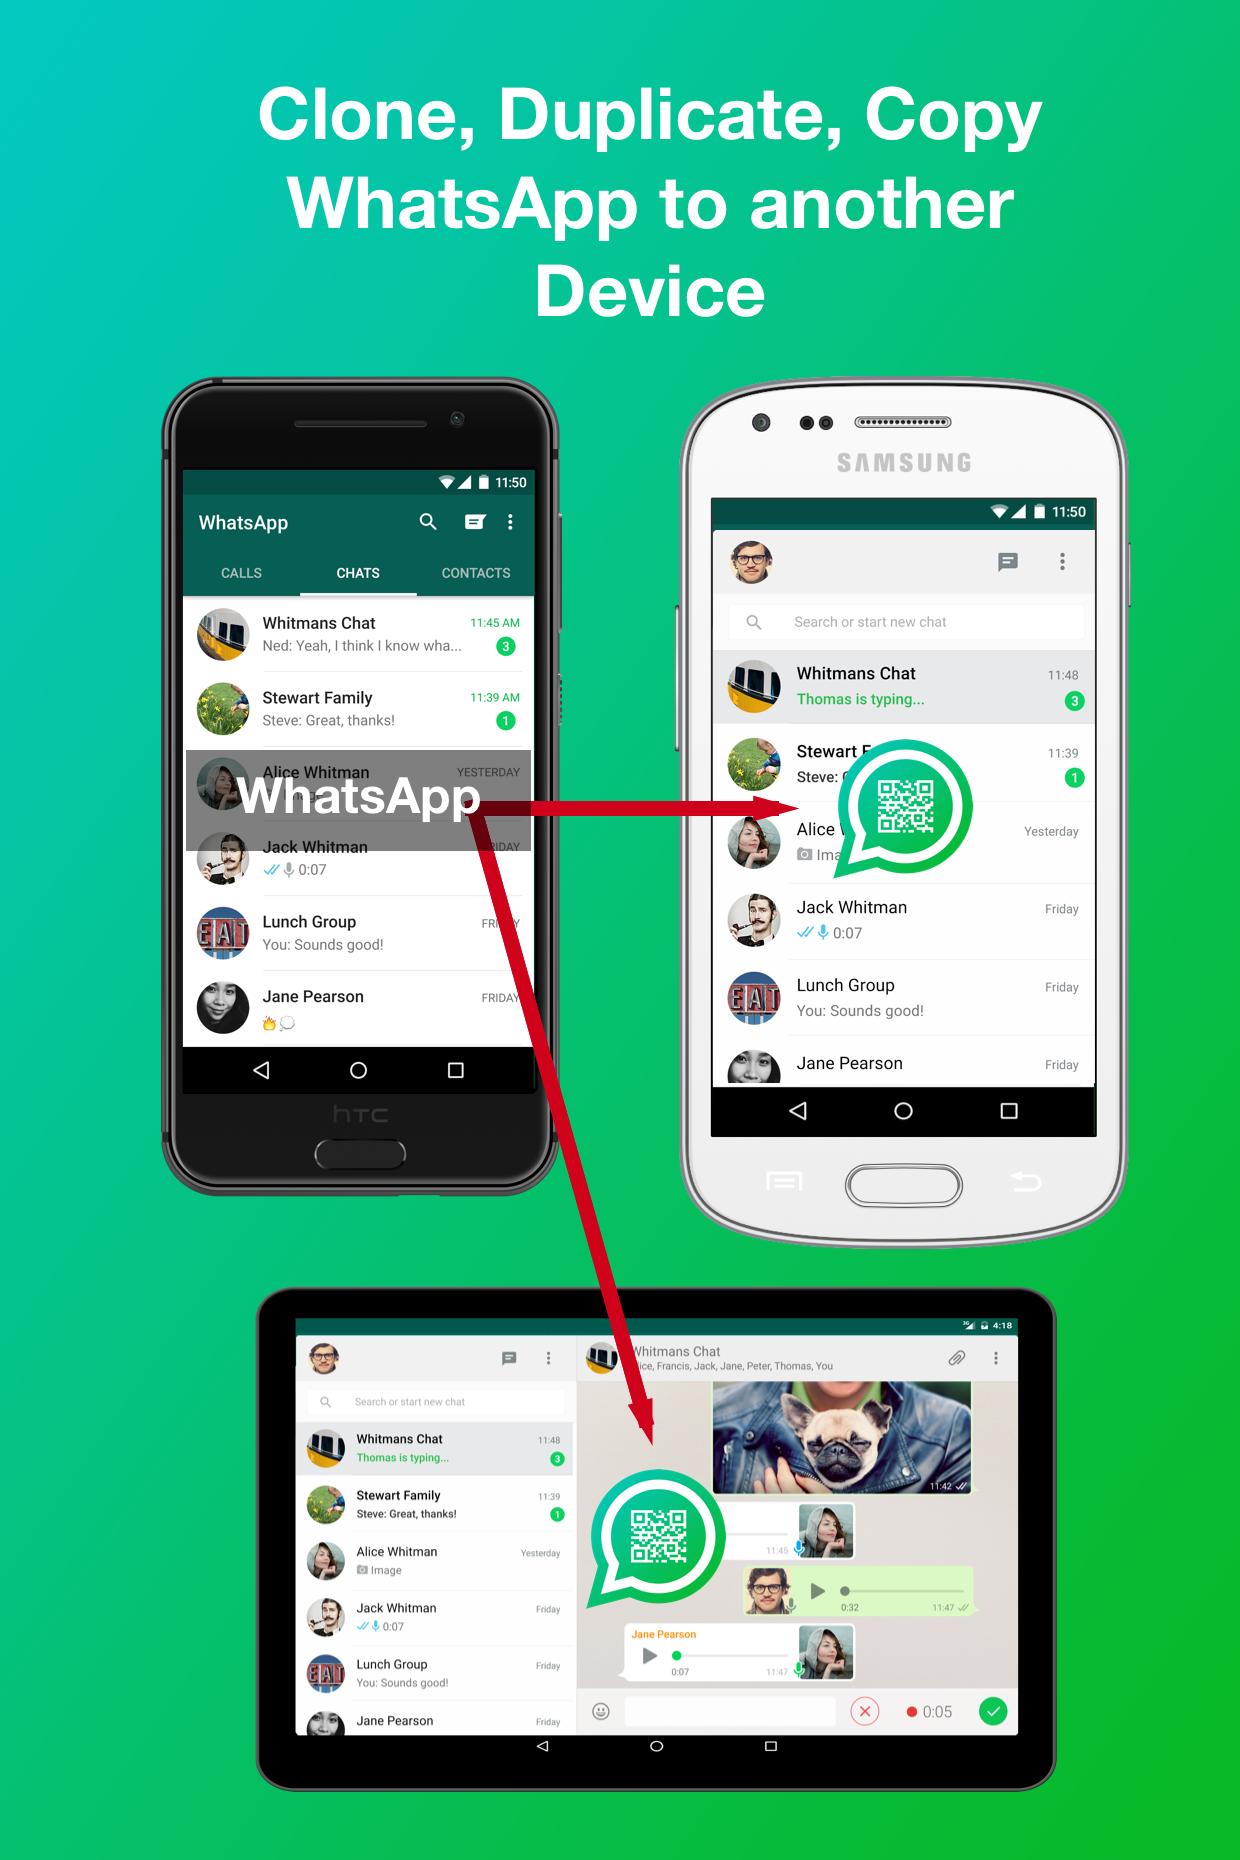 How to clone WhatsApp, and is it an effective spy method?